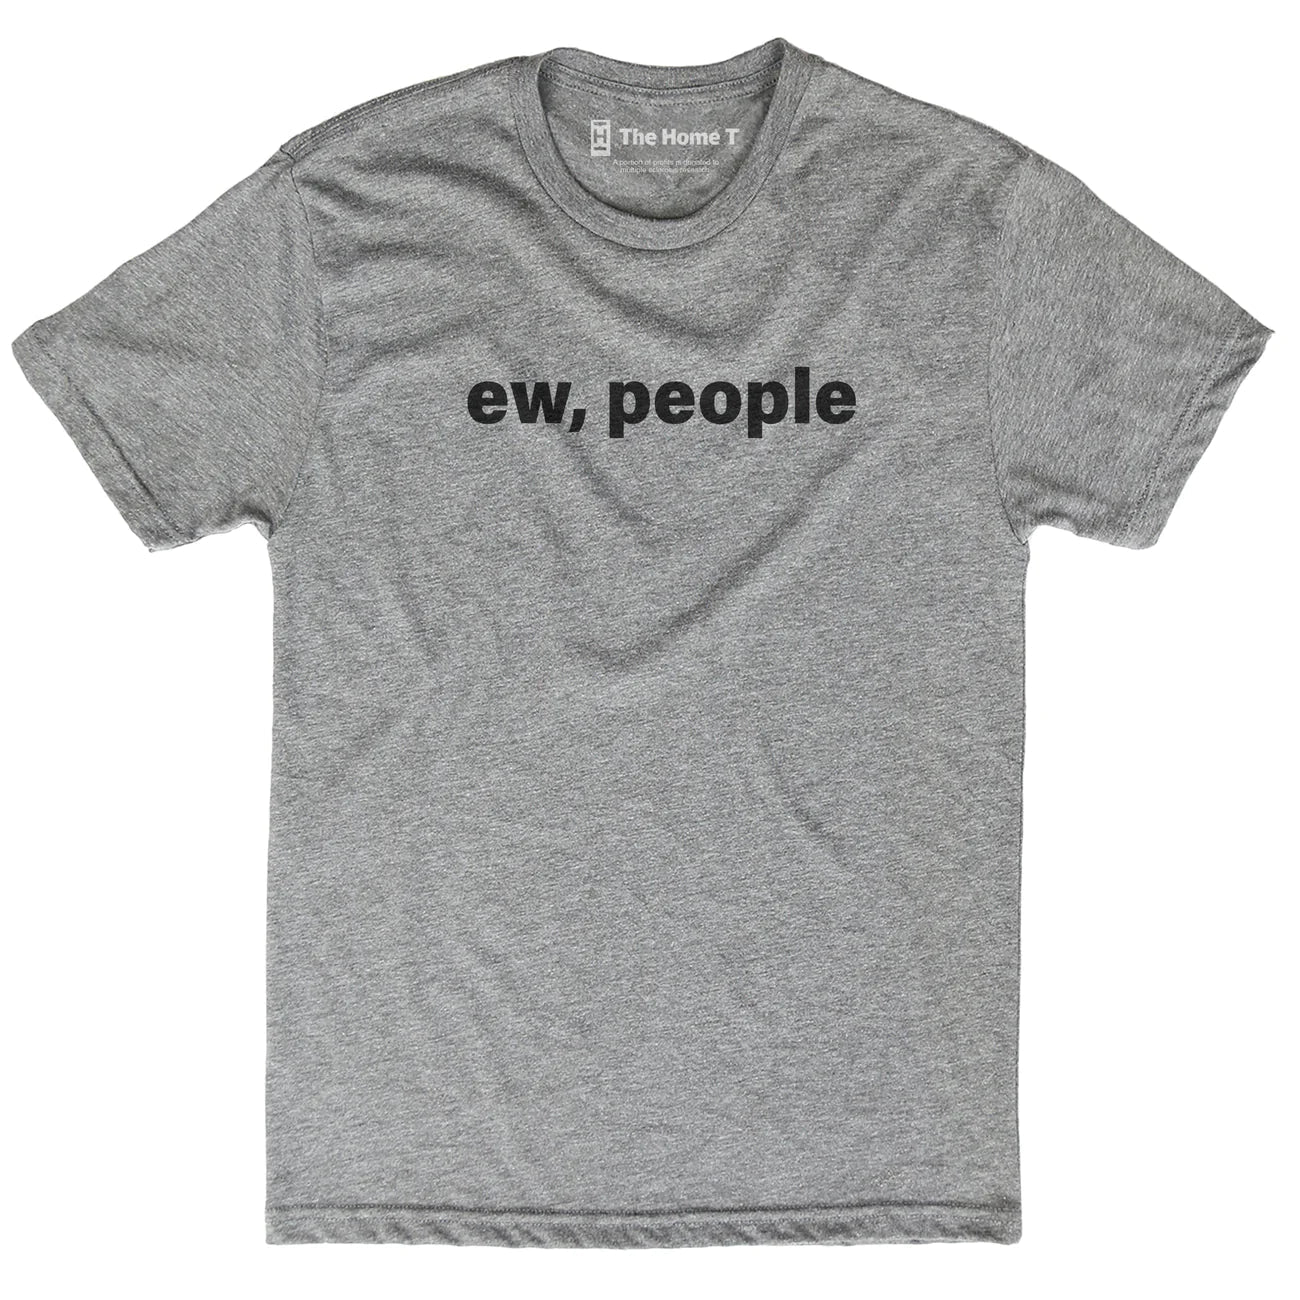 Ew People: A Look at the Popular Phrase and Its Meaning